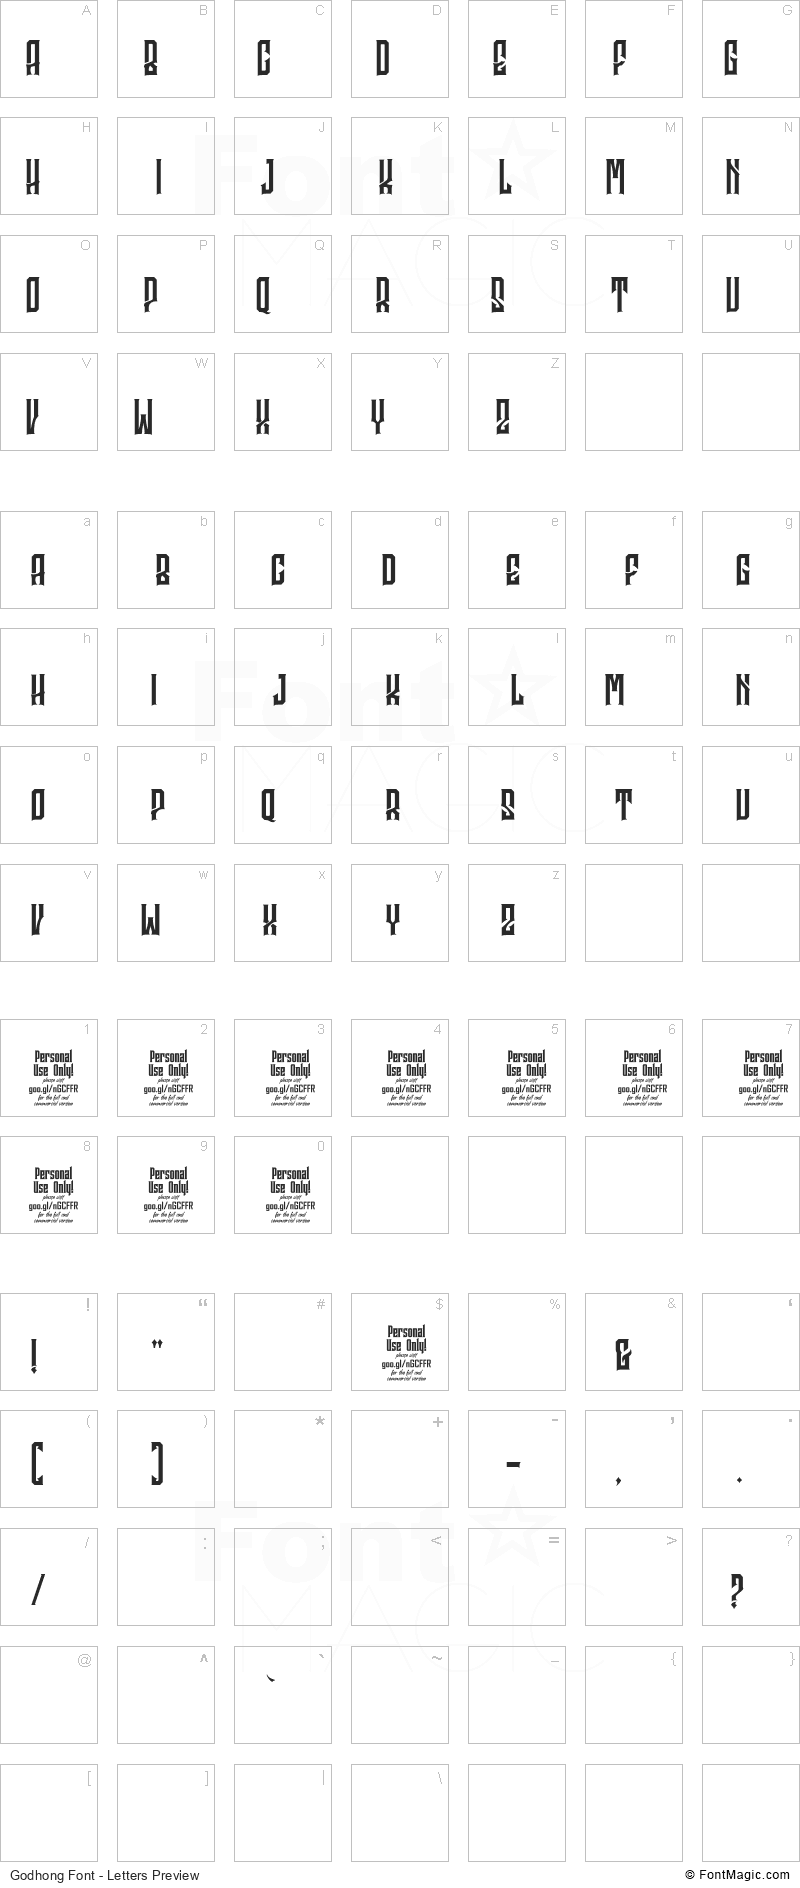 Godhong Font - All Latters Preview Chart